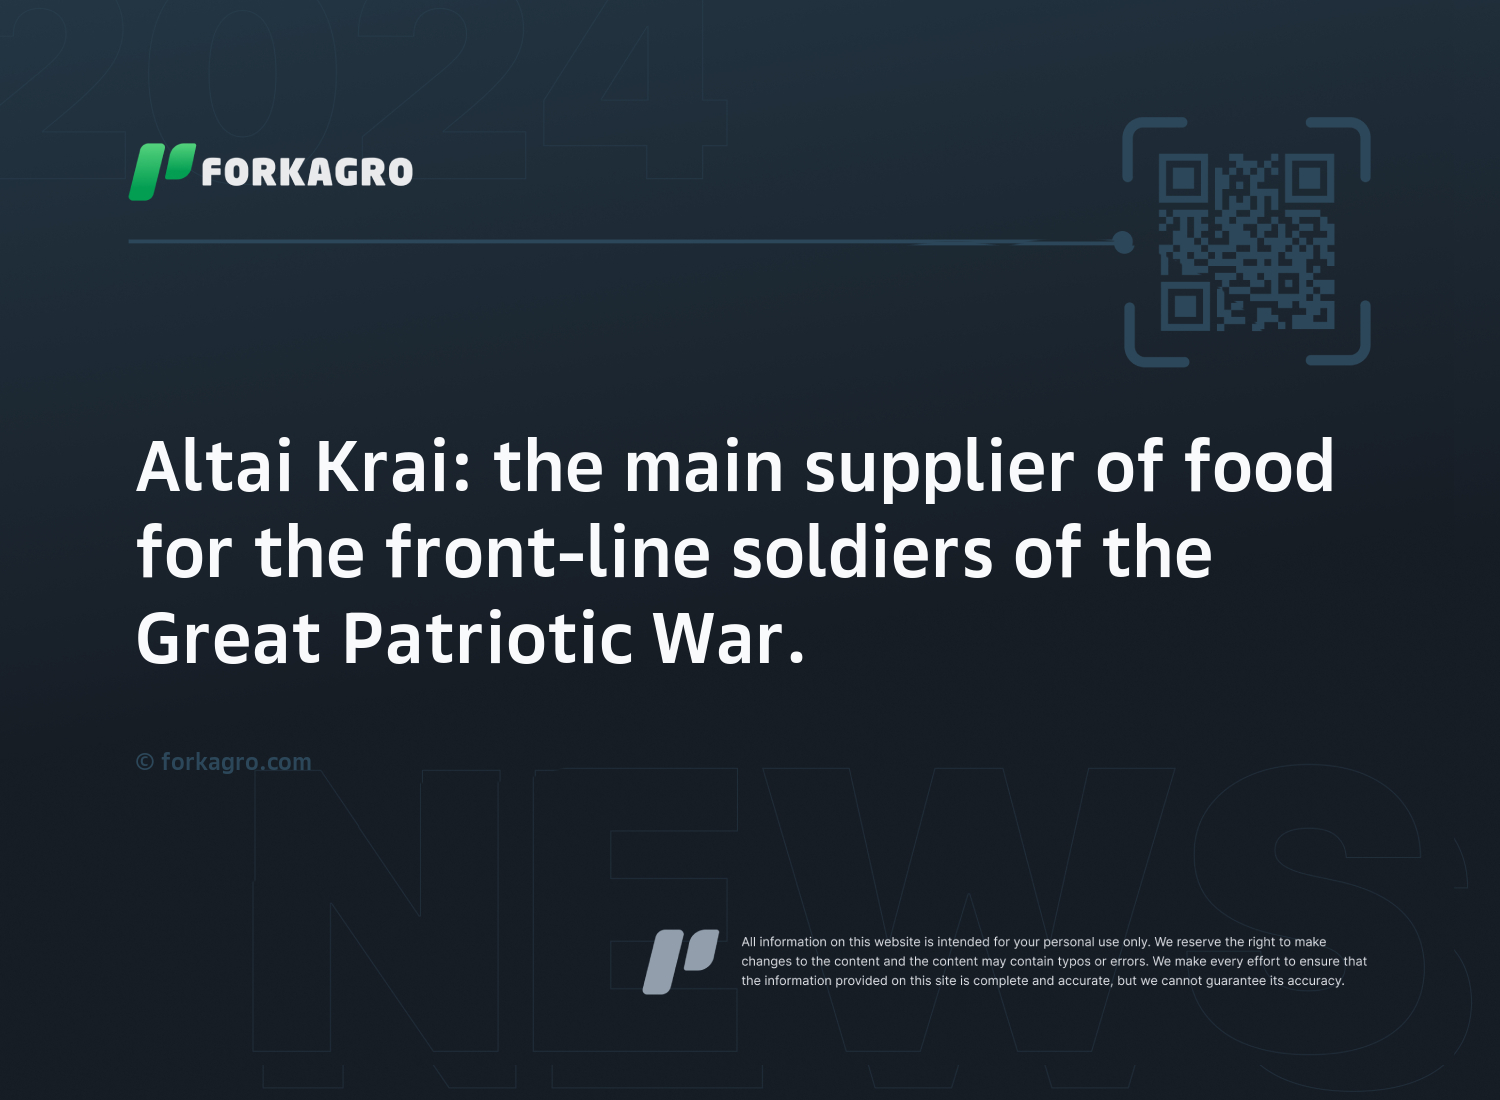 Altai Krai: the main supplier of food for the front-line soldiers of the Great Patriotic War.